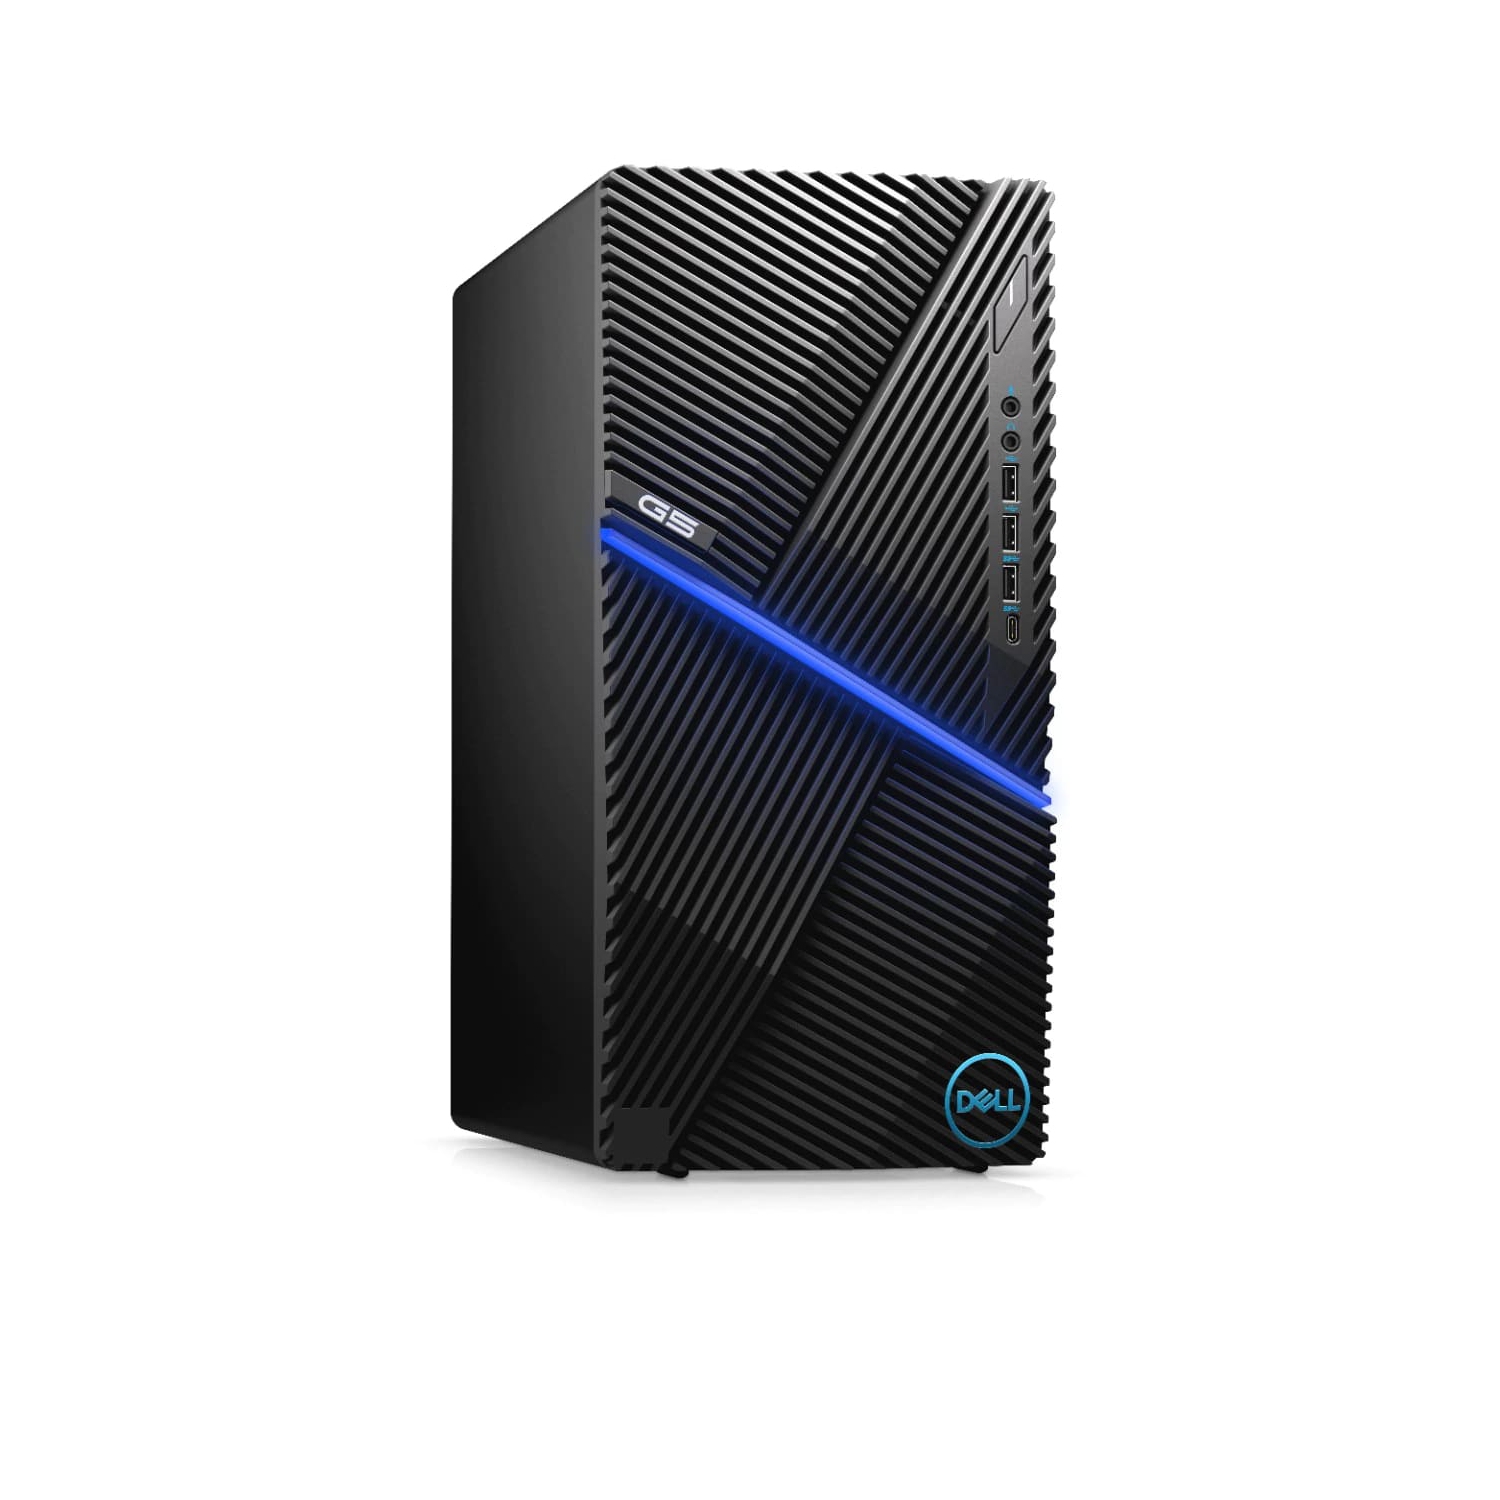 Refurbished (Excellent) - Dell G5 5000 Gaming Desktop (2020) | Core i7 - 1TB HDD + 512GB SSD - 16GB RAM - RX 5700 | 8 Cores @ 5.1 GHz - 10th Gen CPU Certified Refurbished